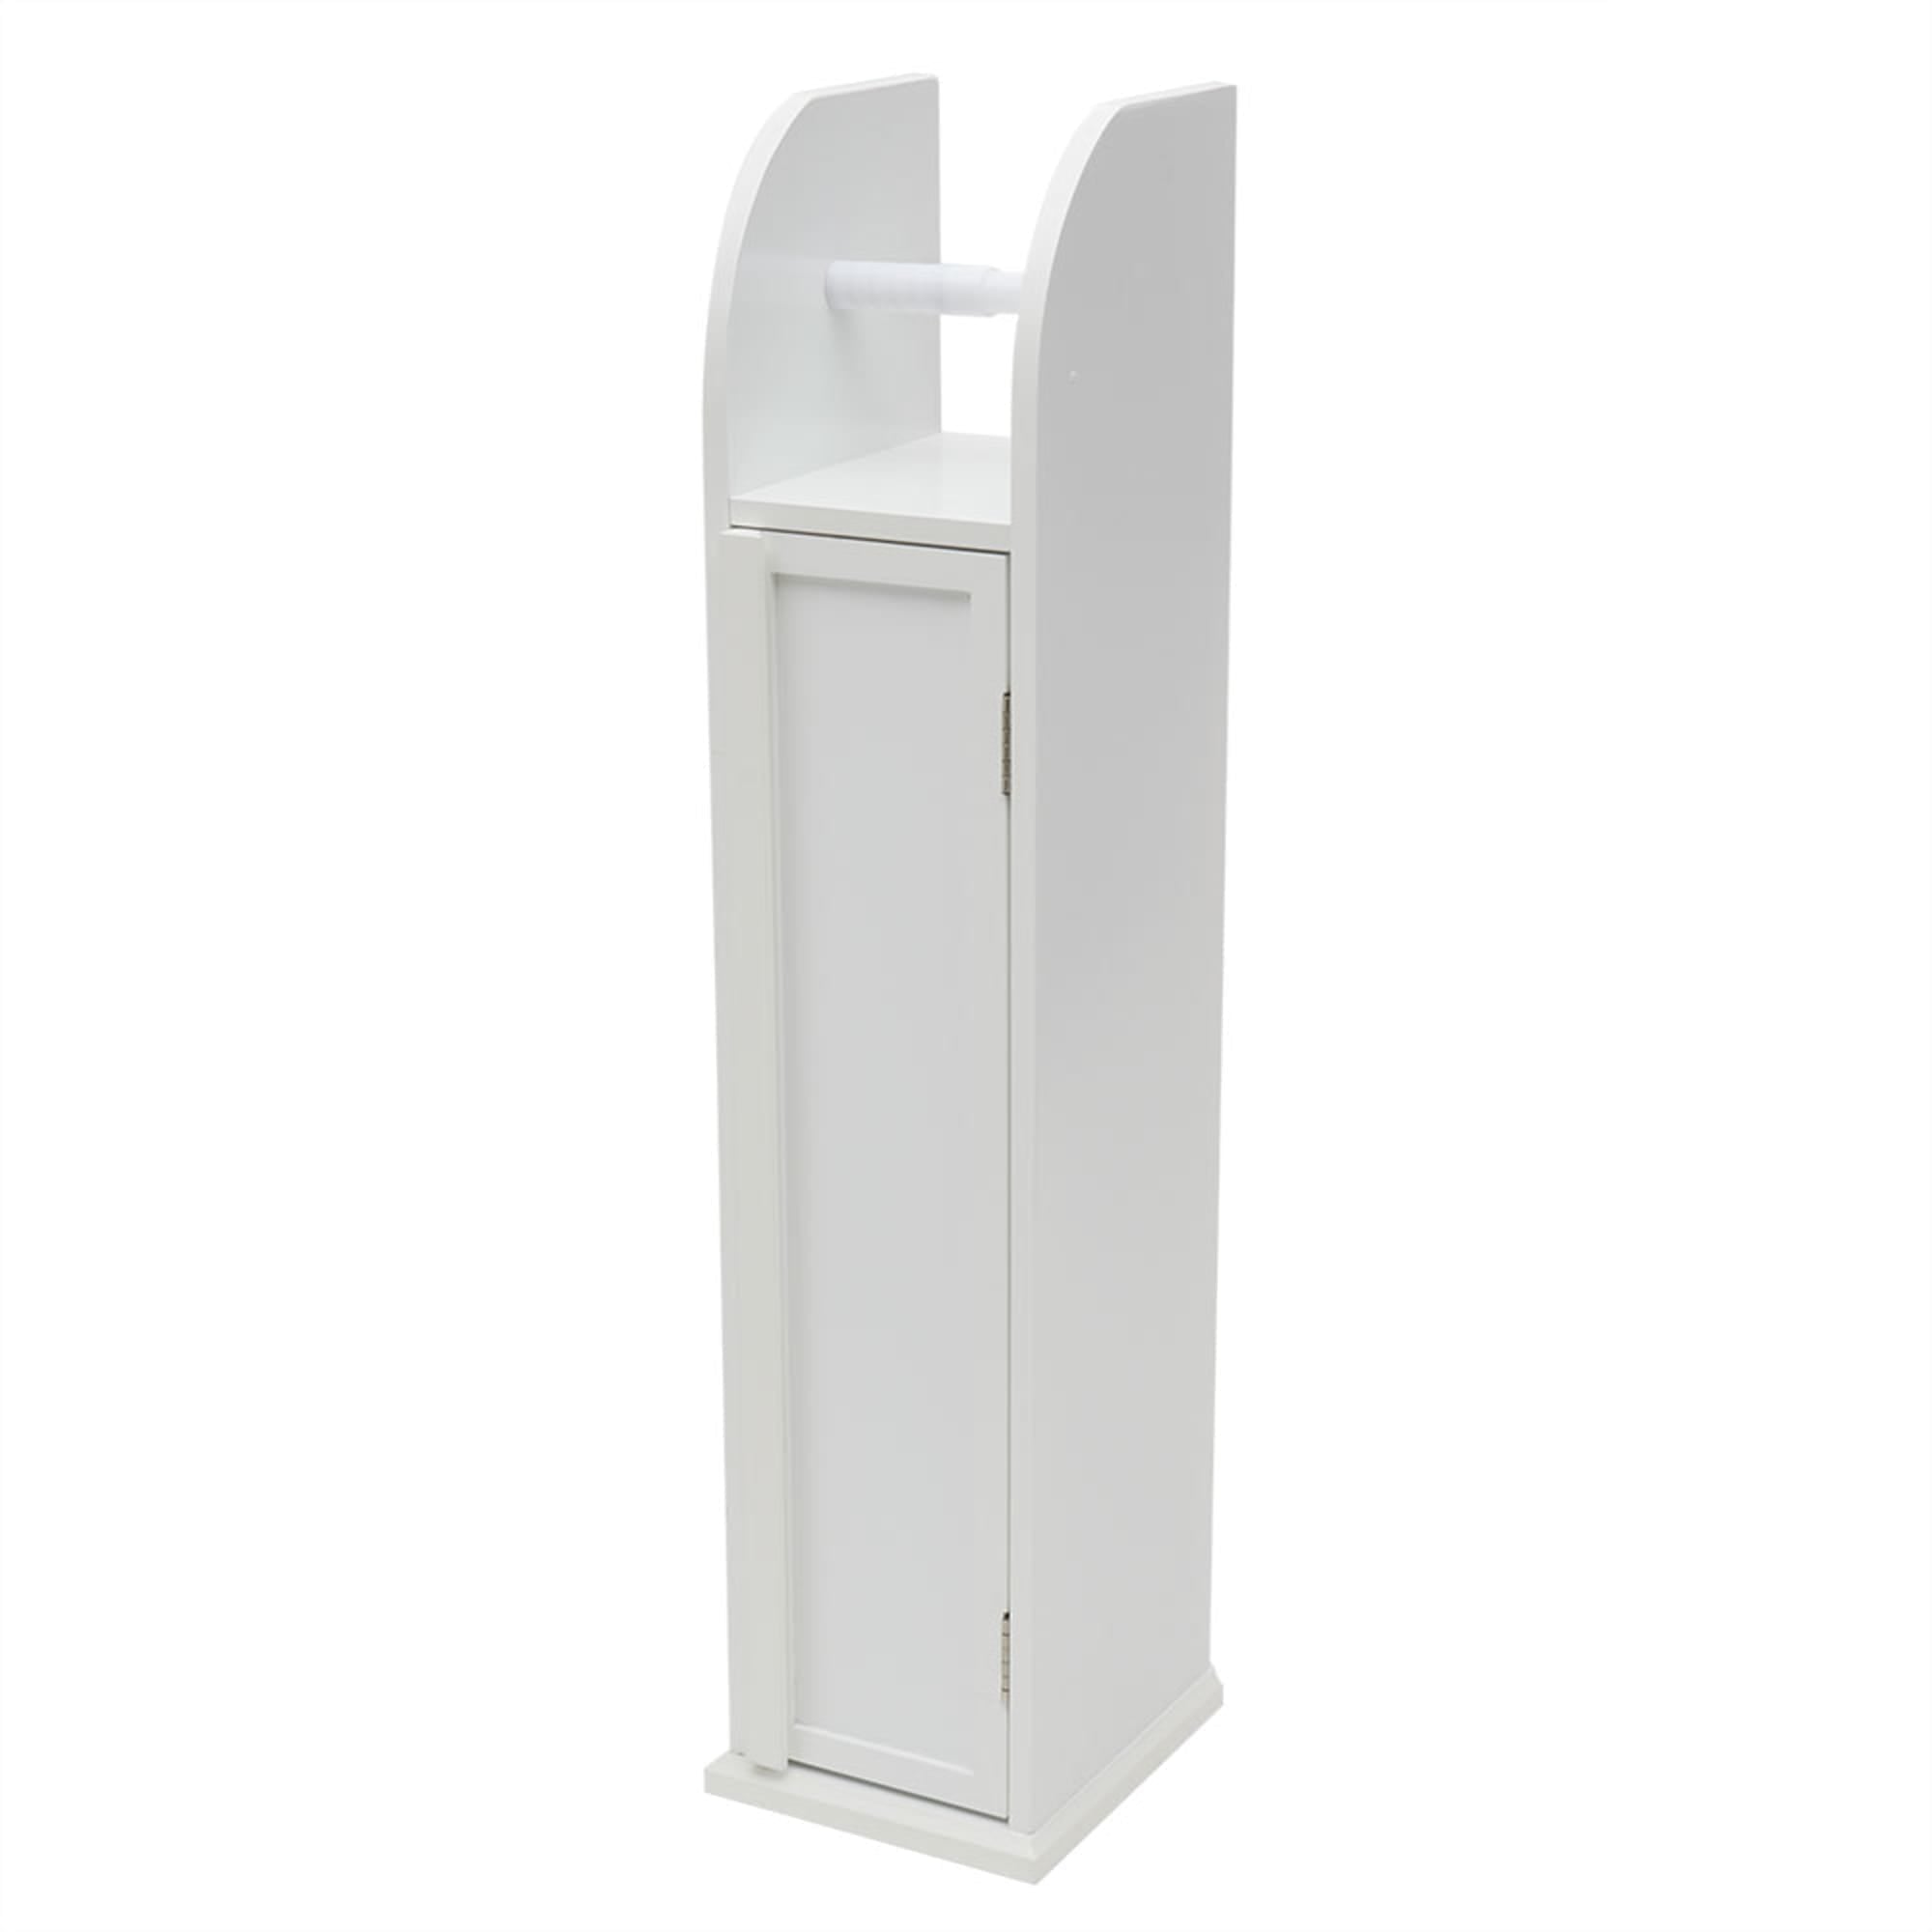 Home Basics 2 Tier Cabinet with Toilet Paper Holder $20.00 EACH, CASE PACK OF 1